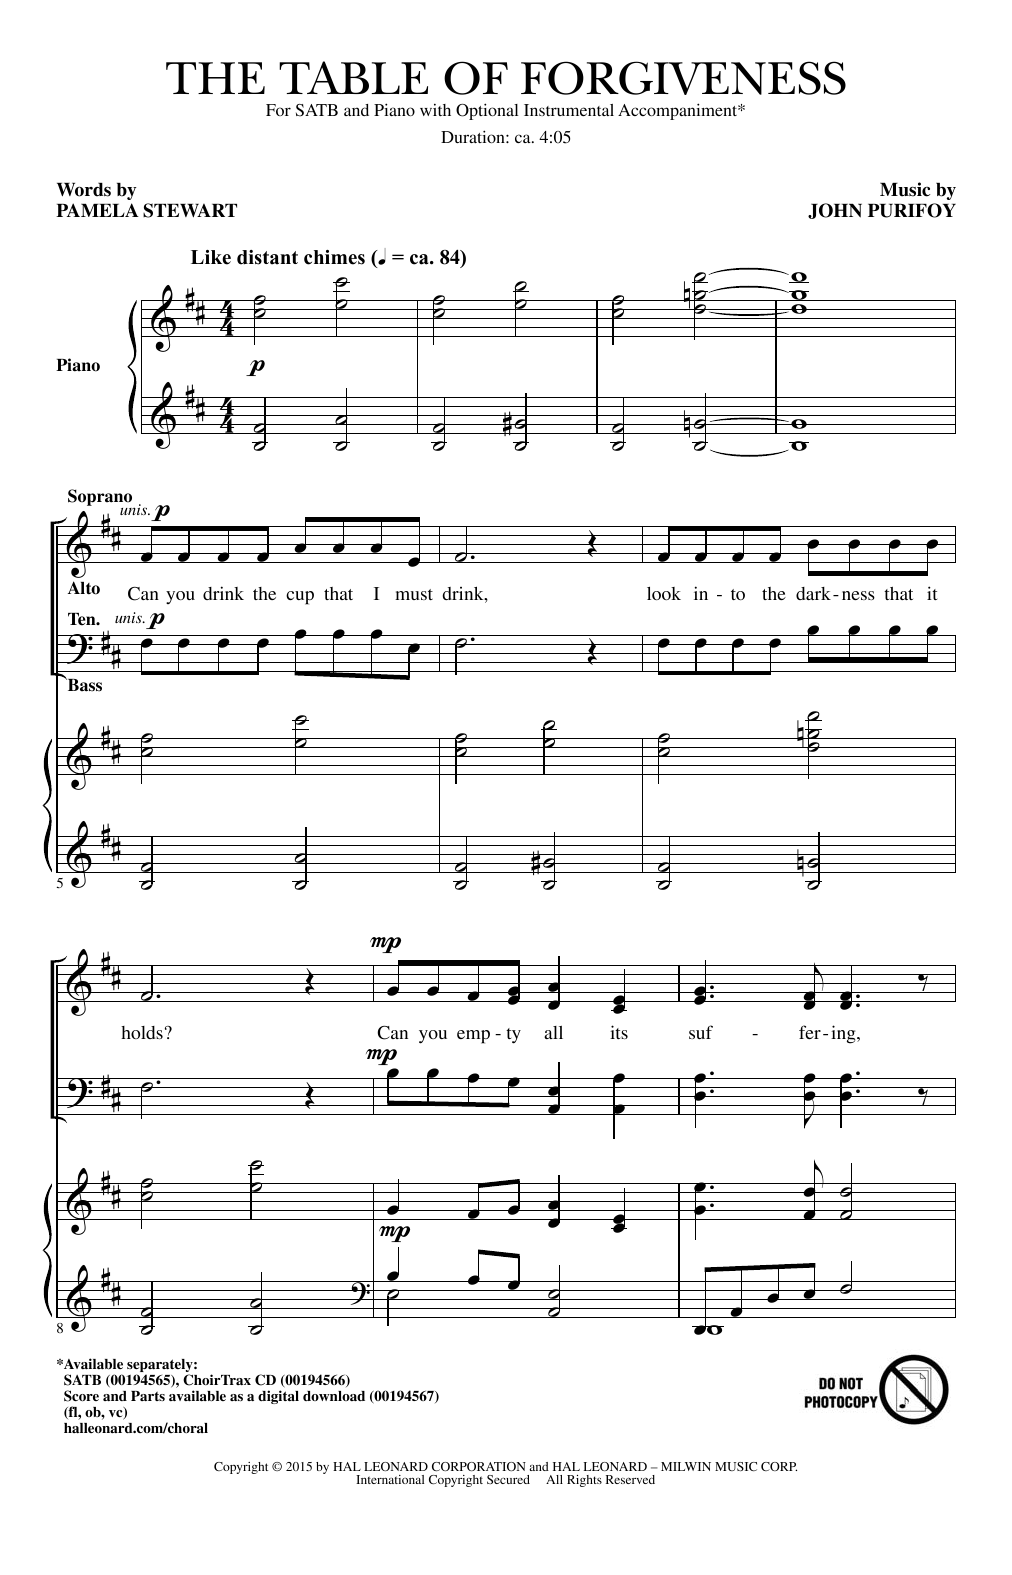 Download John Purifoy The Table Of Forgiveness Sheet Music